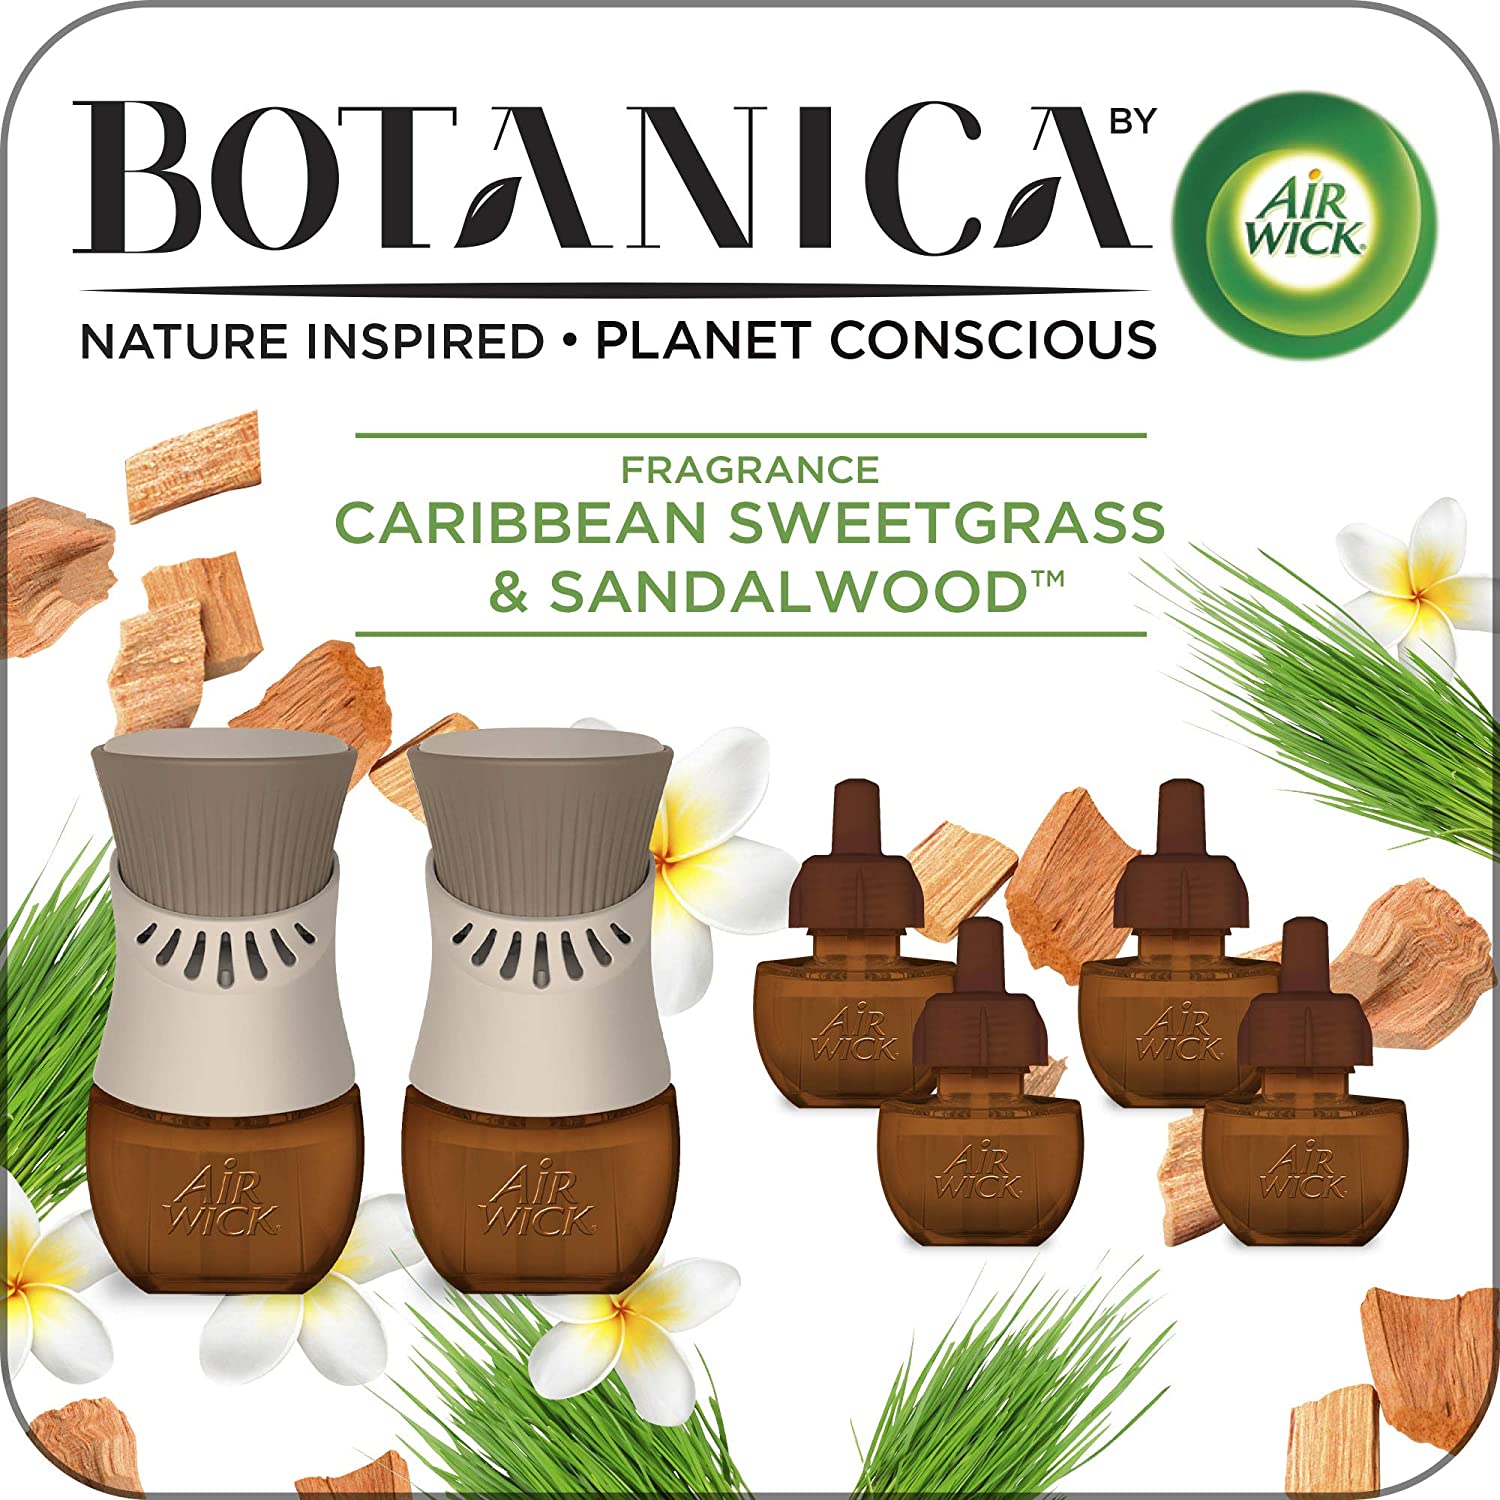 AIR WICK Botanica Scented Oil  Caribbean Sweetgrass  Sandalwood  Kit Discontinued